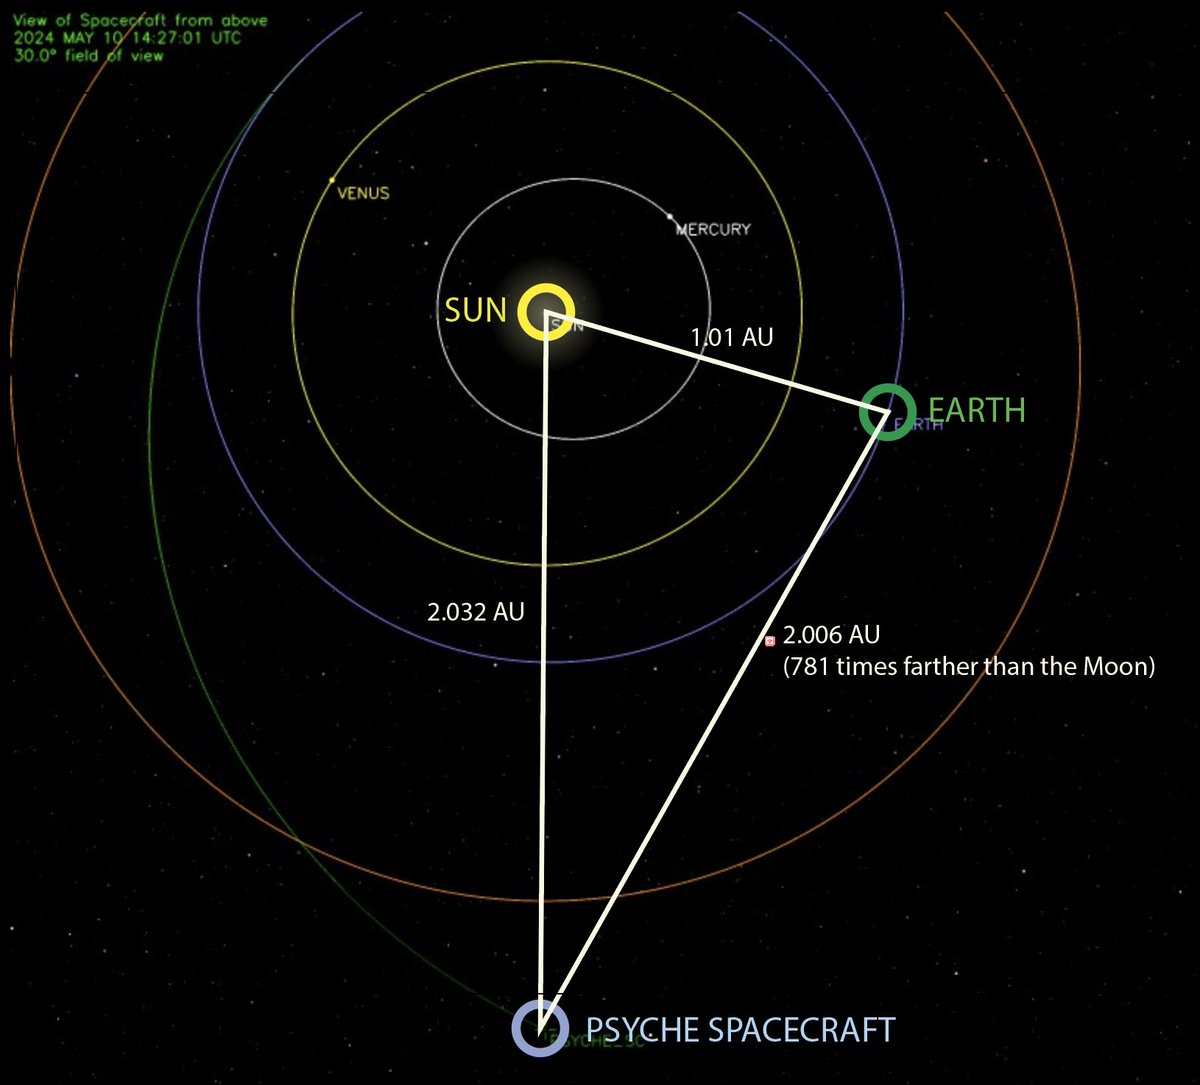 Here's a graphic of the @MissionToPsyche - Sun - Earth isosceles triangle today, mission day 211. The spacecraft's speed with respect to the Sun is 19.4 km/sec. #PI_Daily